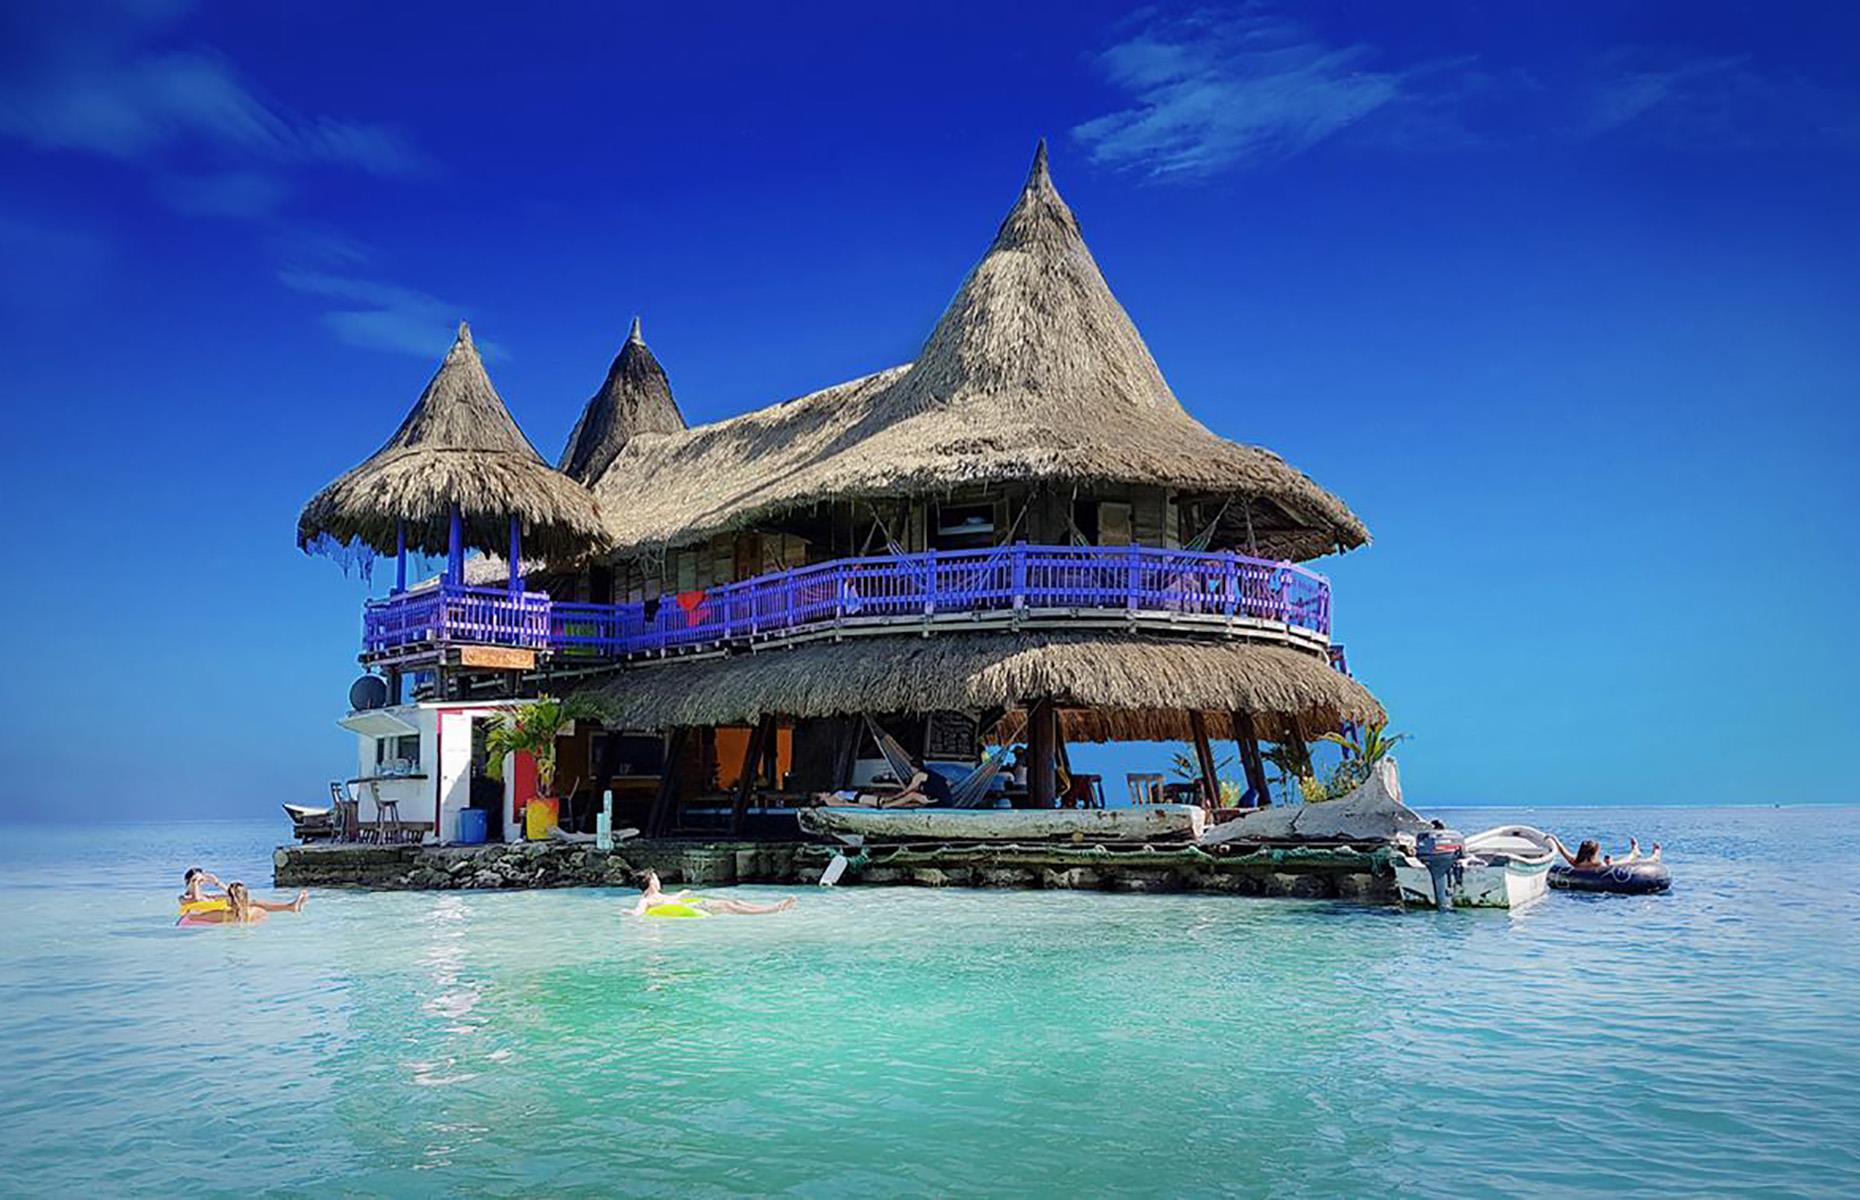 <p>Floating hotels aren't just the preserve of the wealthy, and they don't have to be 5-star luxury properties either. In Colombia, <a href="https://casaenelagua.com">Casa en el Agua</a>, or "House on the Water", is a hostel with a difference. Set in the San Bernardo Corals National Park in Colombia, this modest little hostel enjoys a prime location atop the turquoise Caribbean Sea.</p>